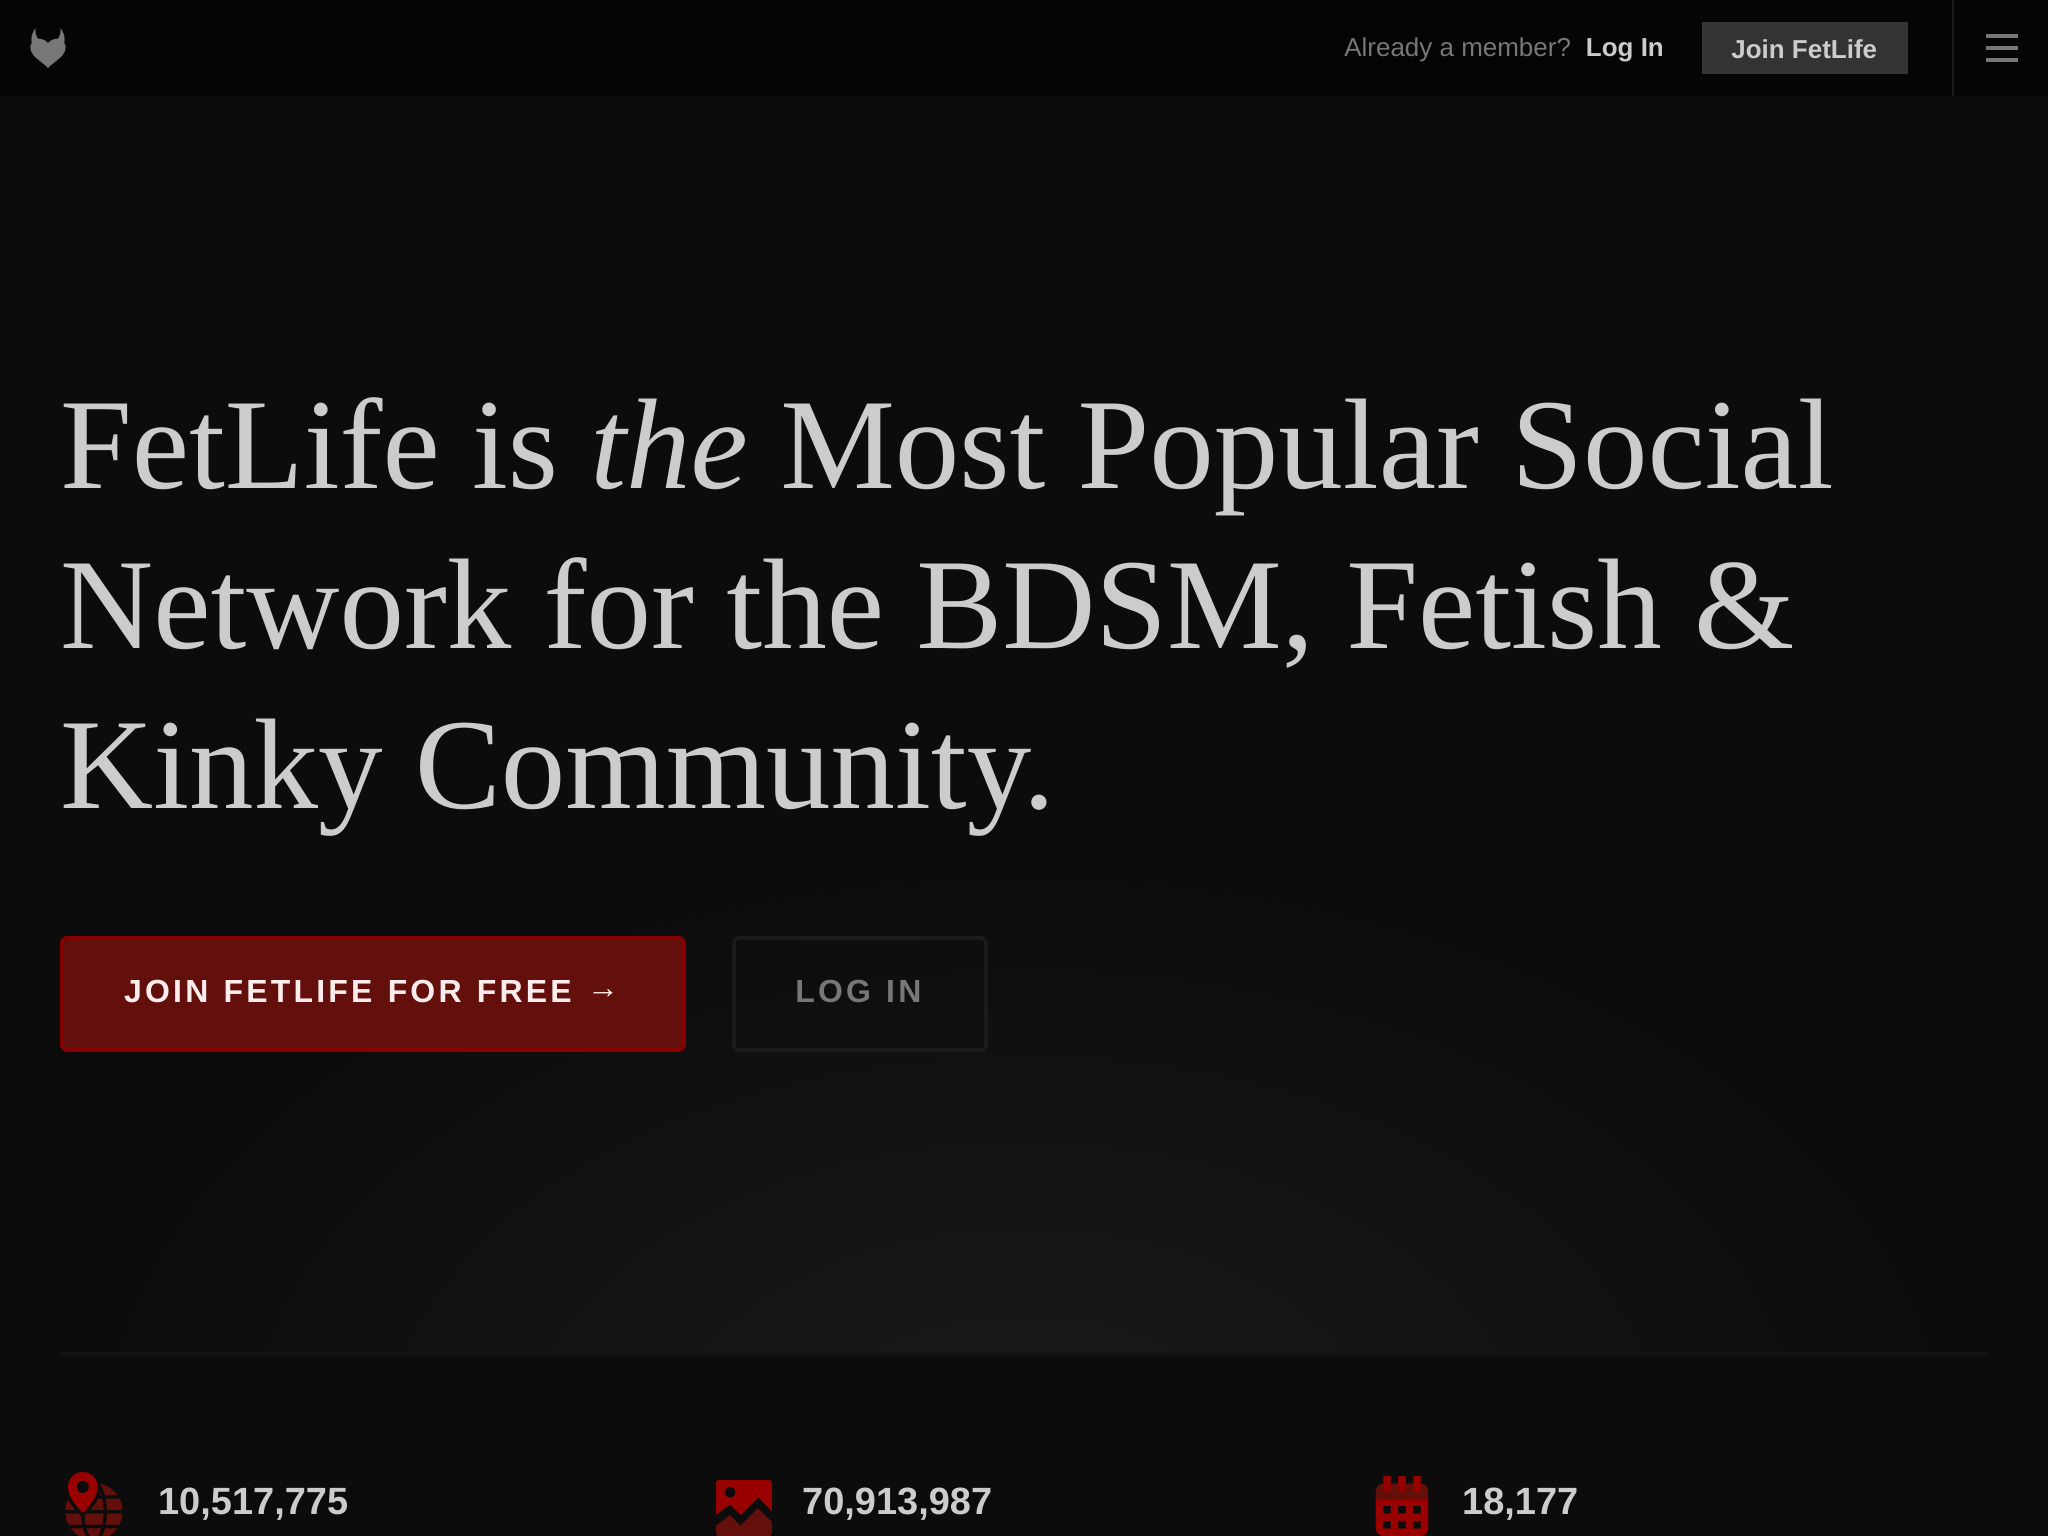 Fetlife Review: An In-Depth Look